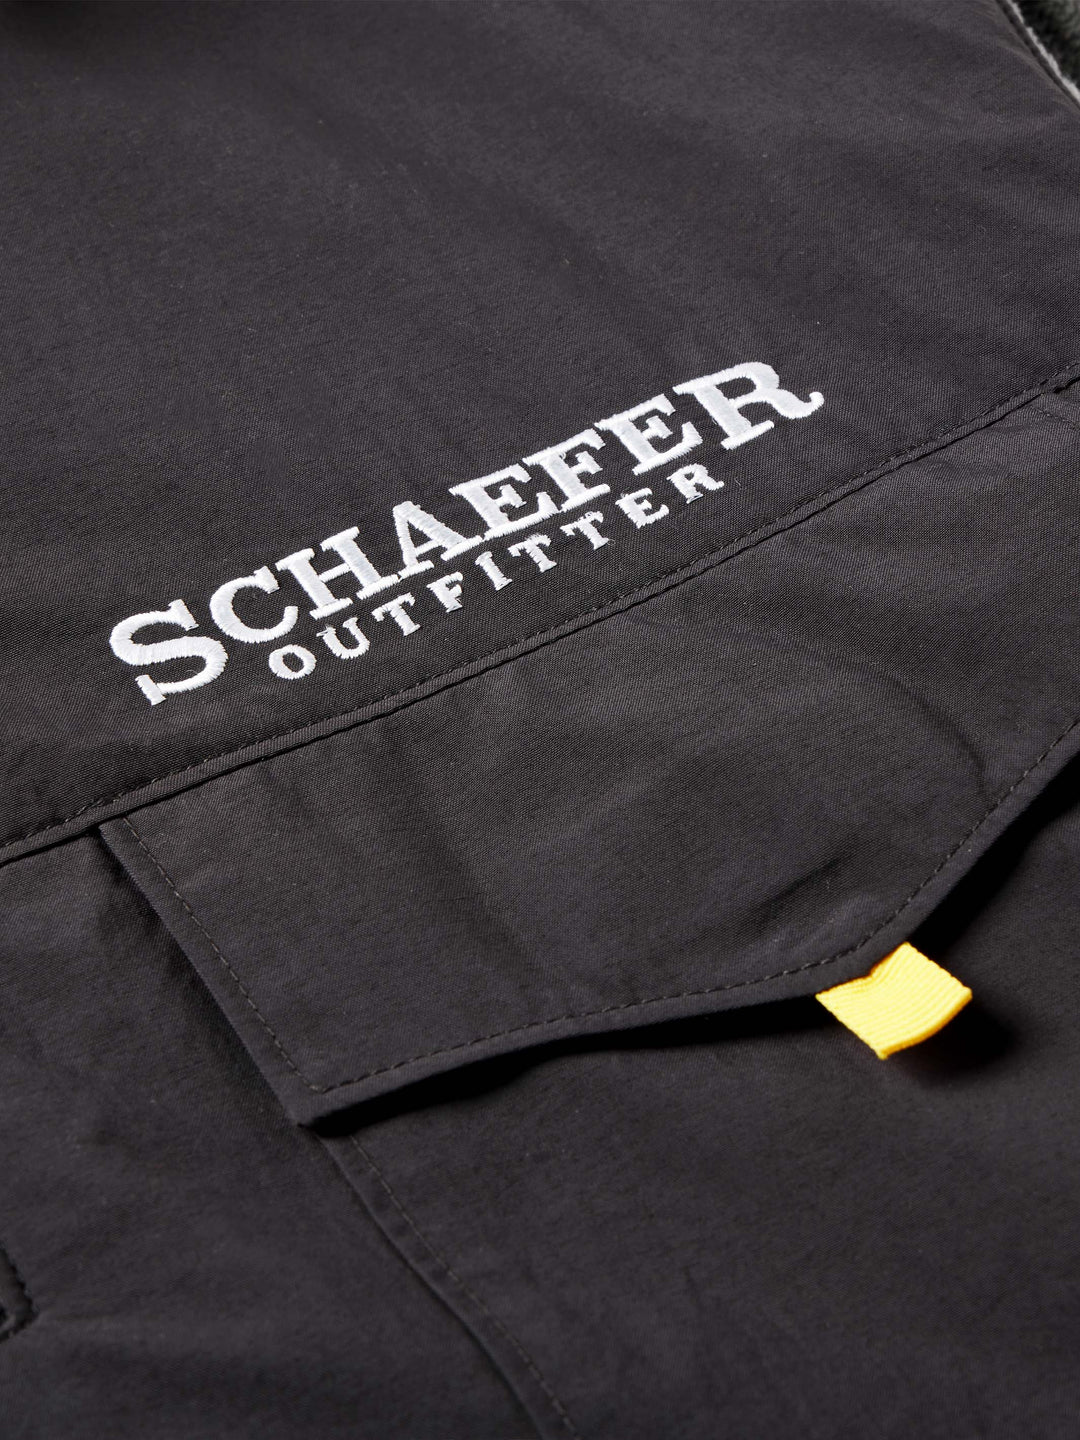 CARBONDALE PULLOVER - Schaefer Outfitter